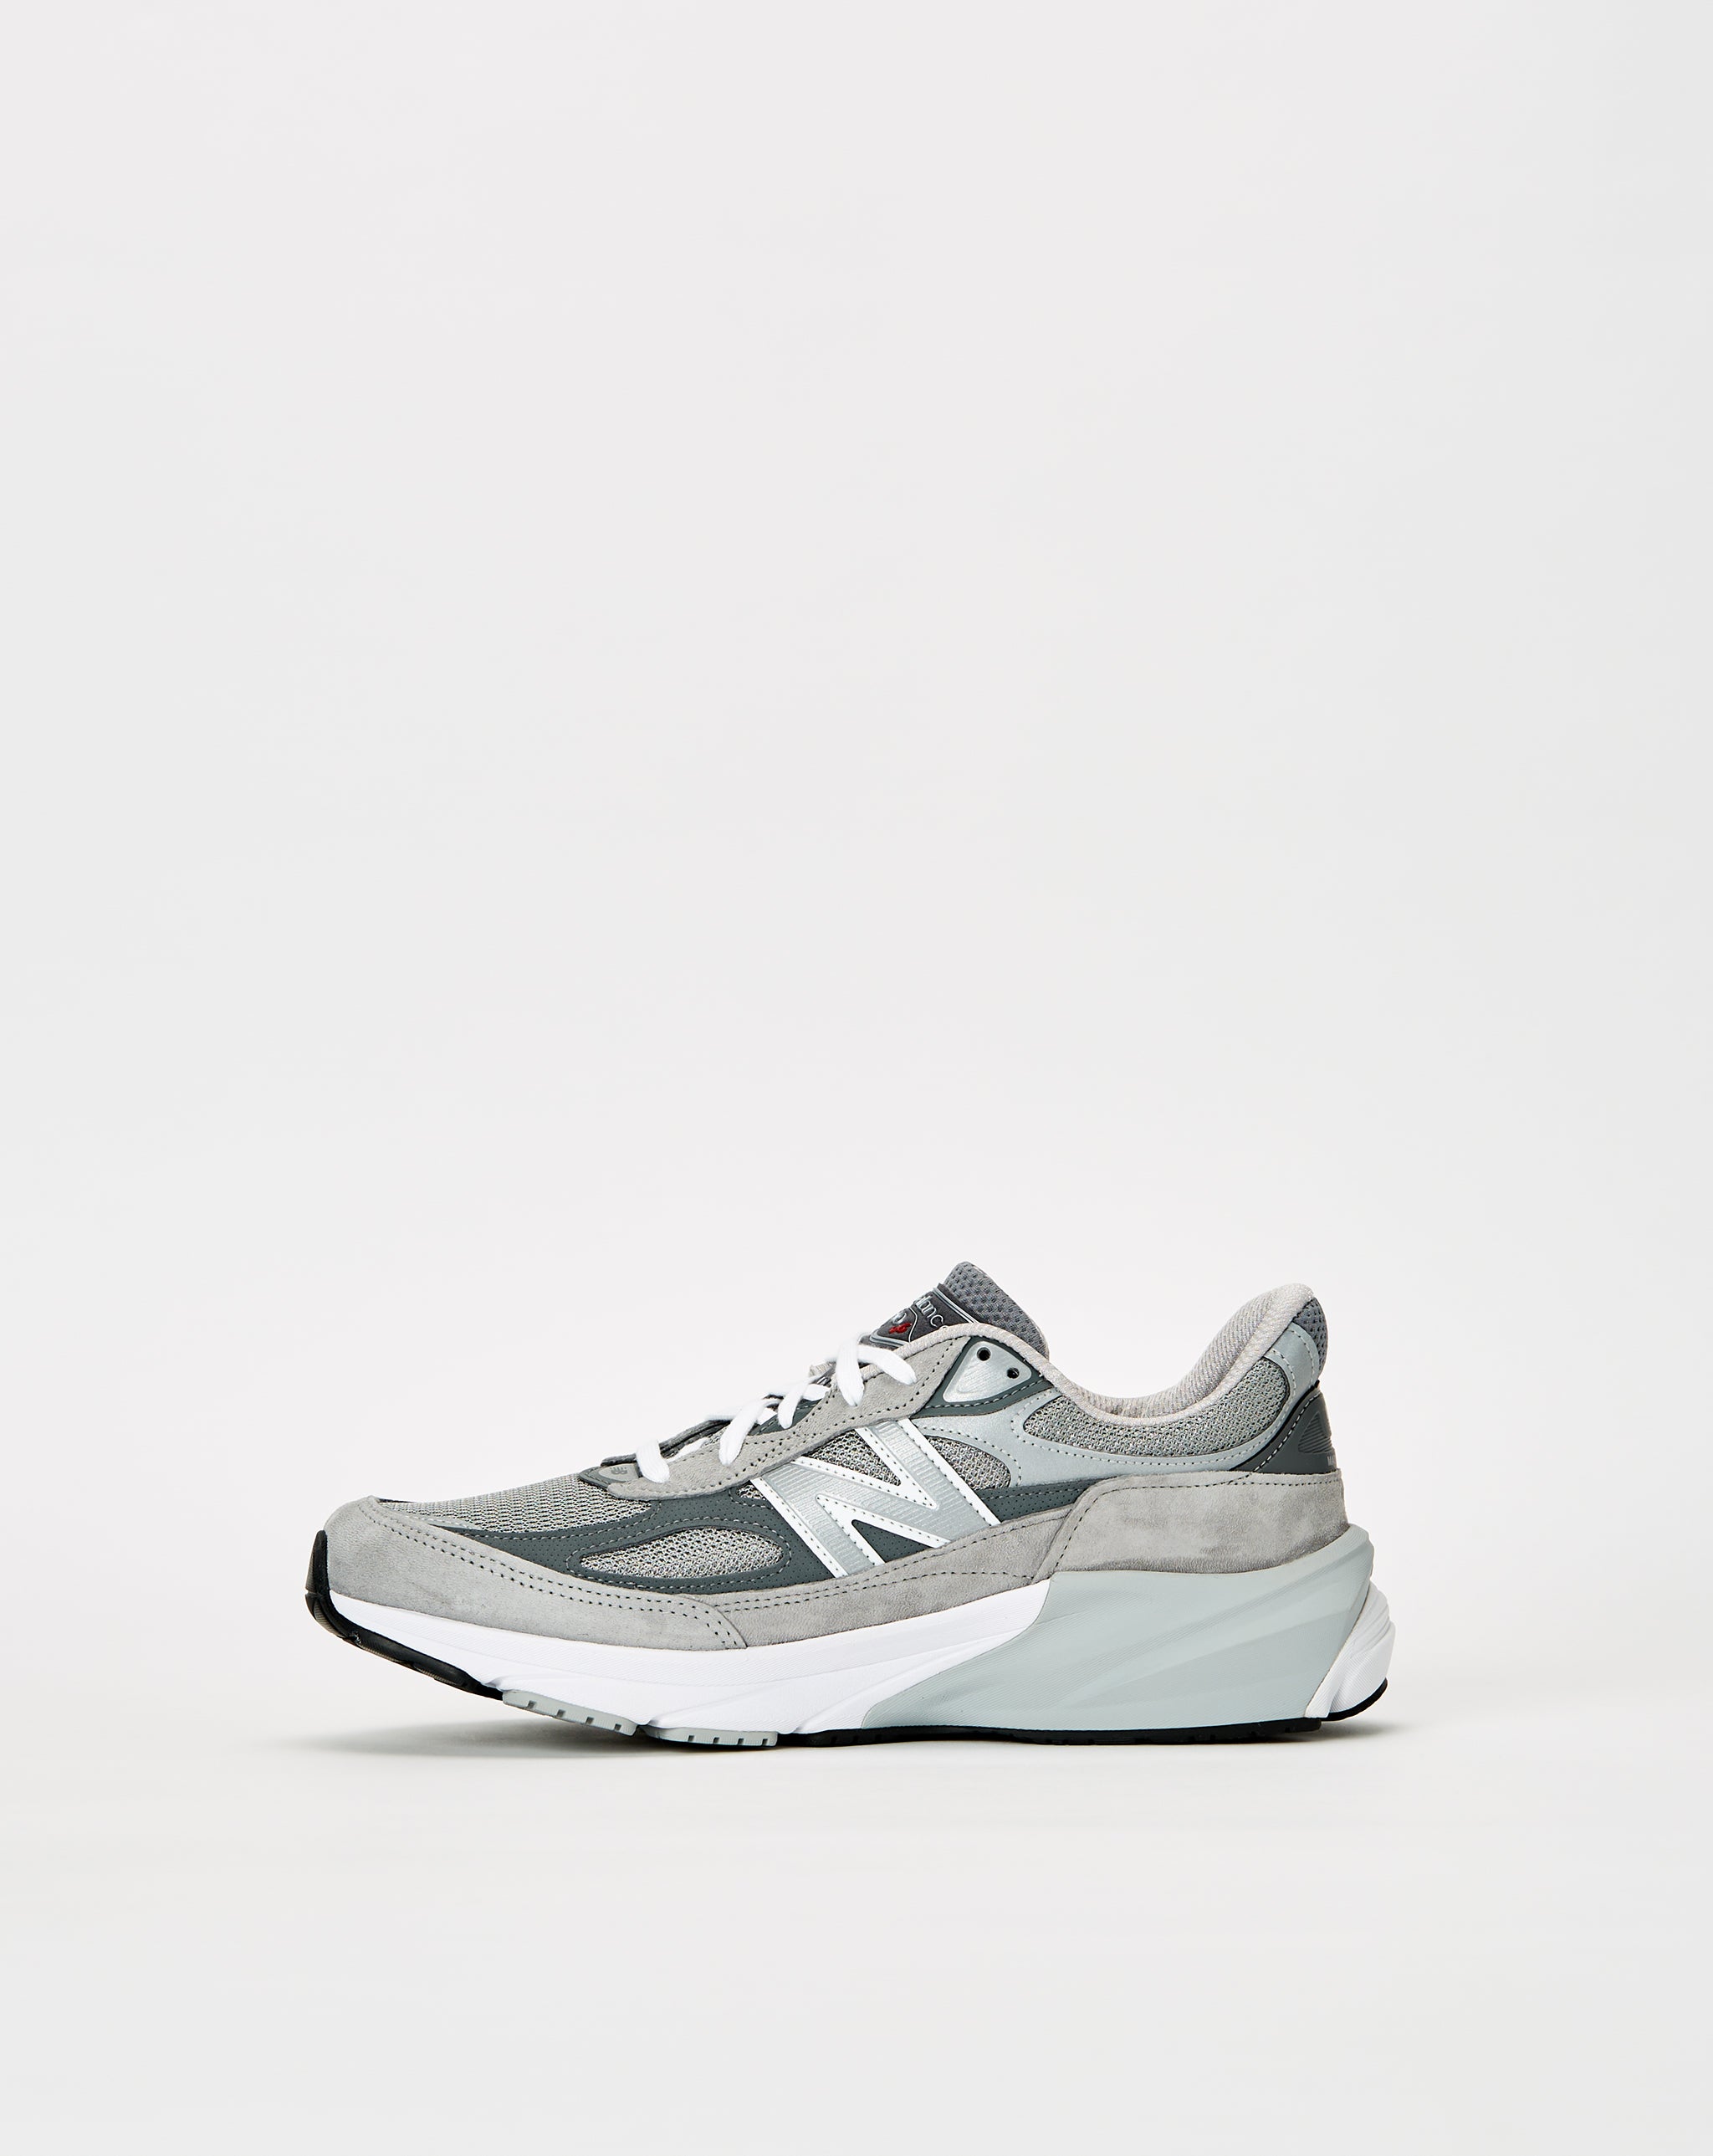 New Balance Made in USA 990v6  - Cheap Atelier-lumieres Jordan outlet